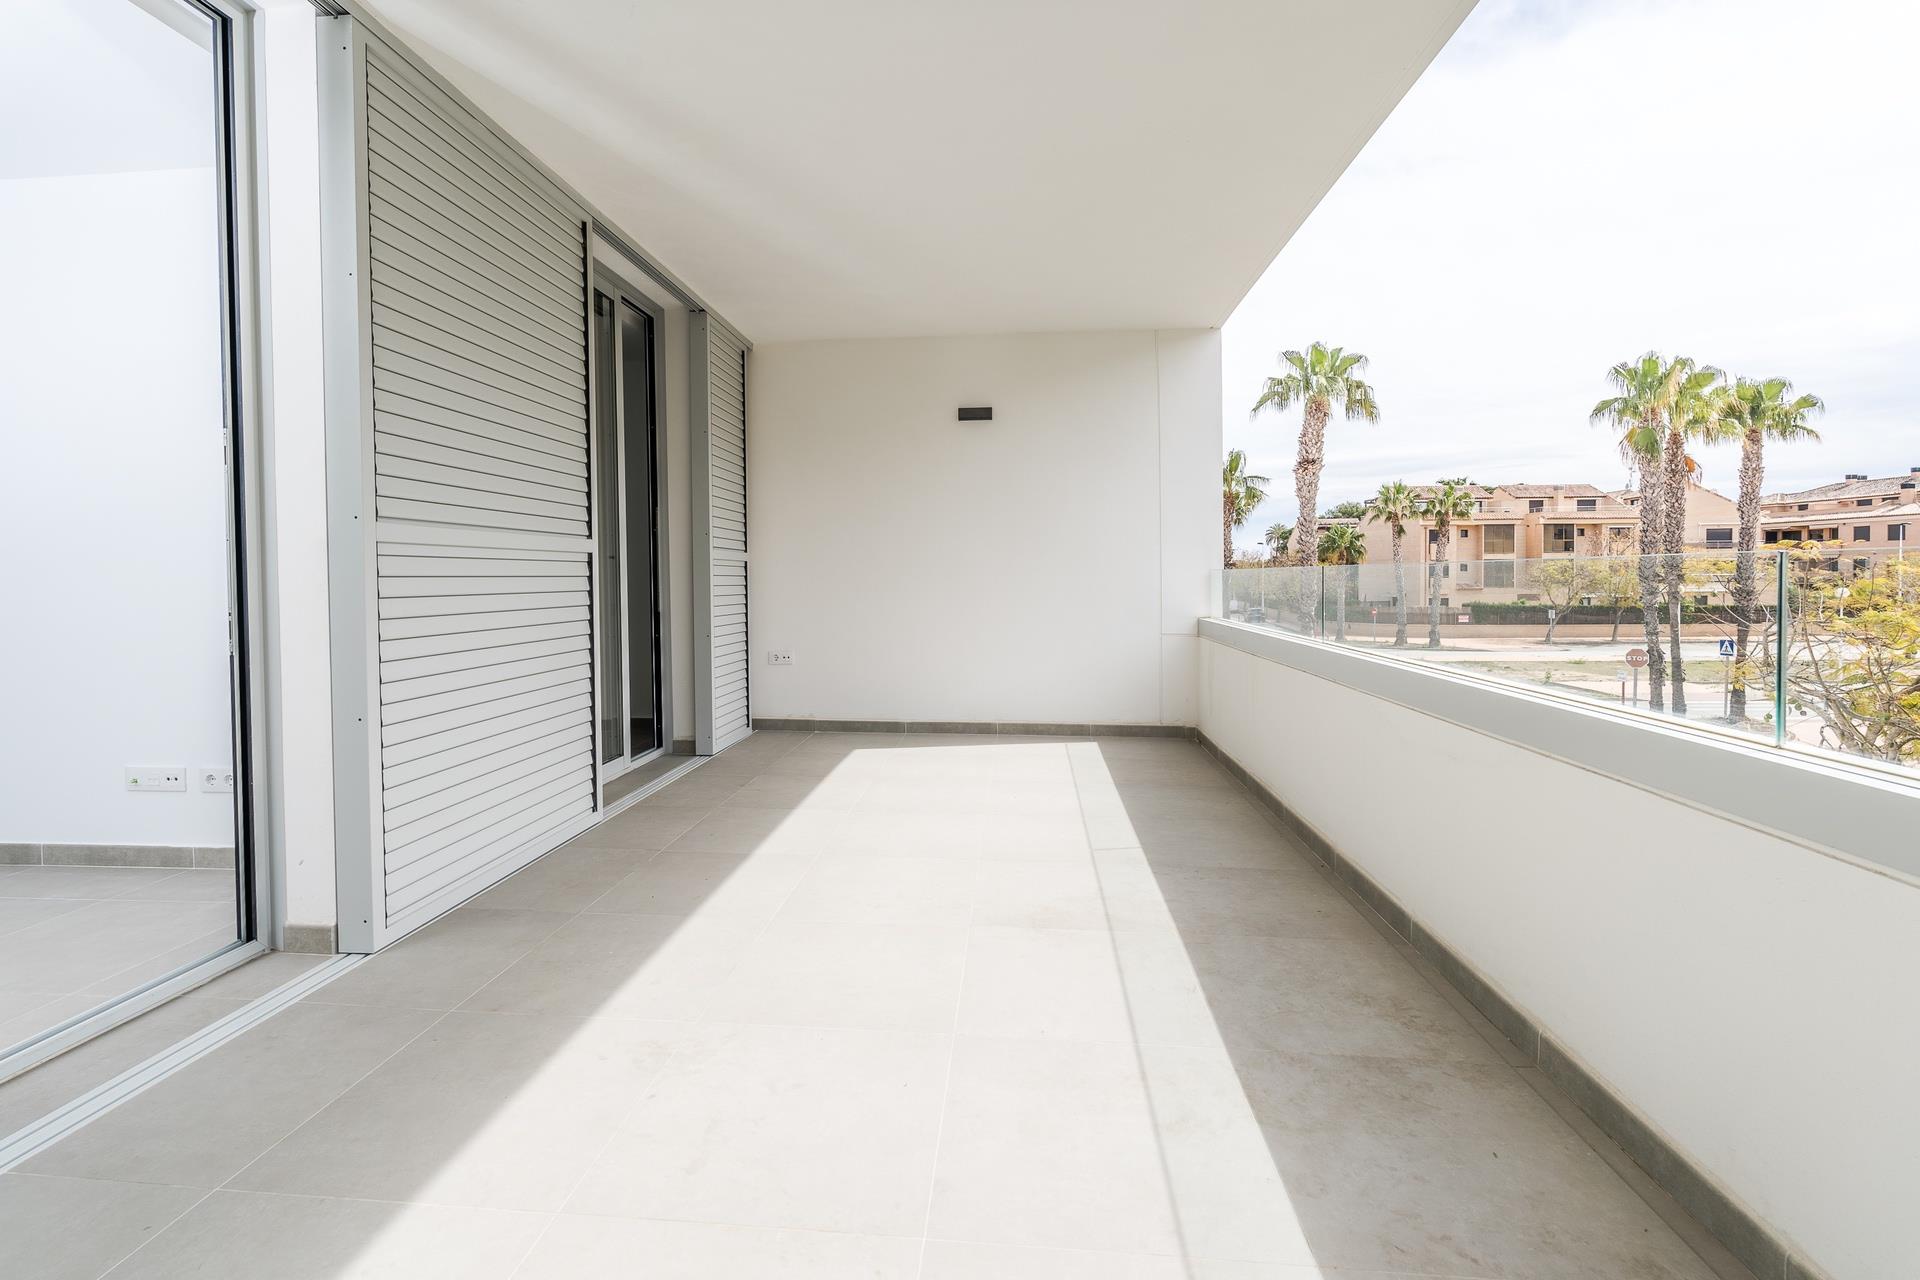 Newly built apartment with 3 bedrooms on Augusta Avenue, Jávea.